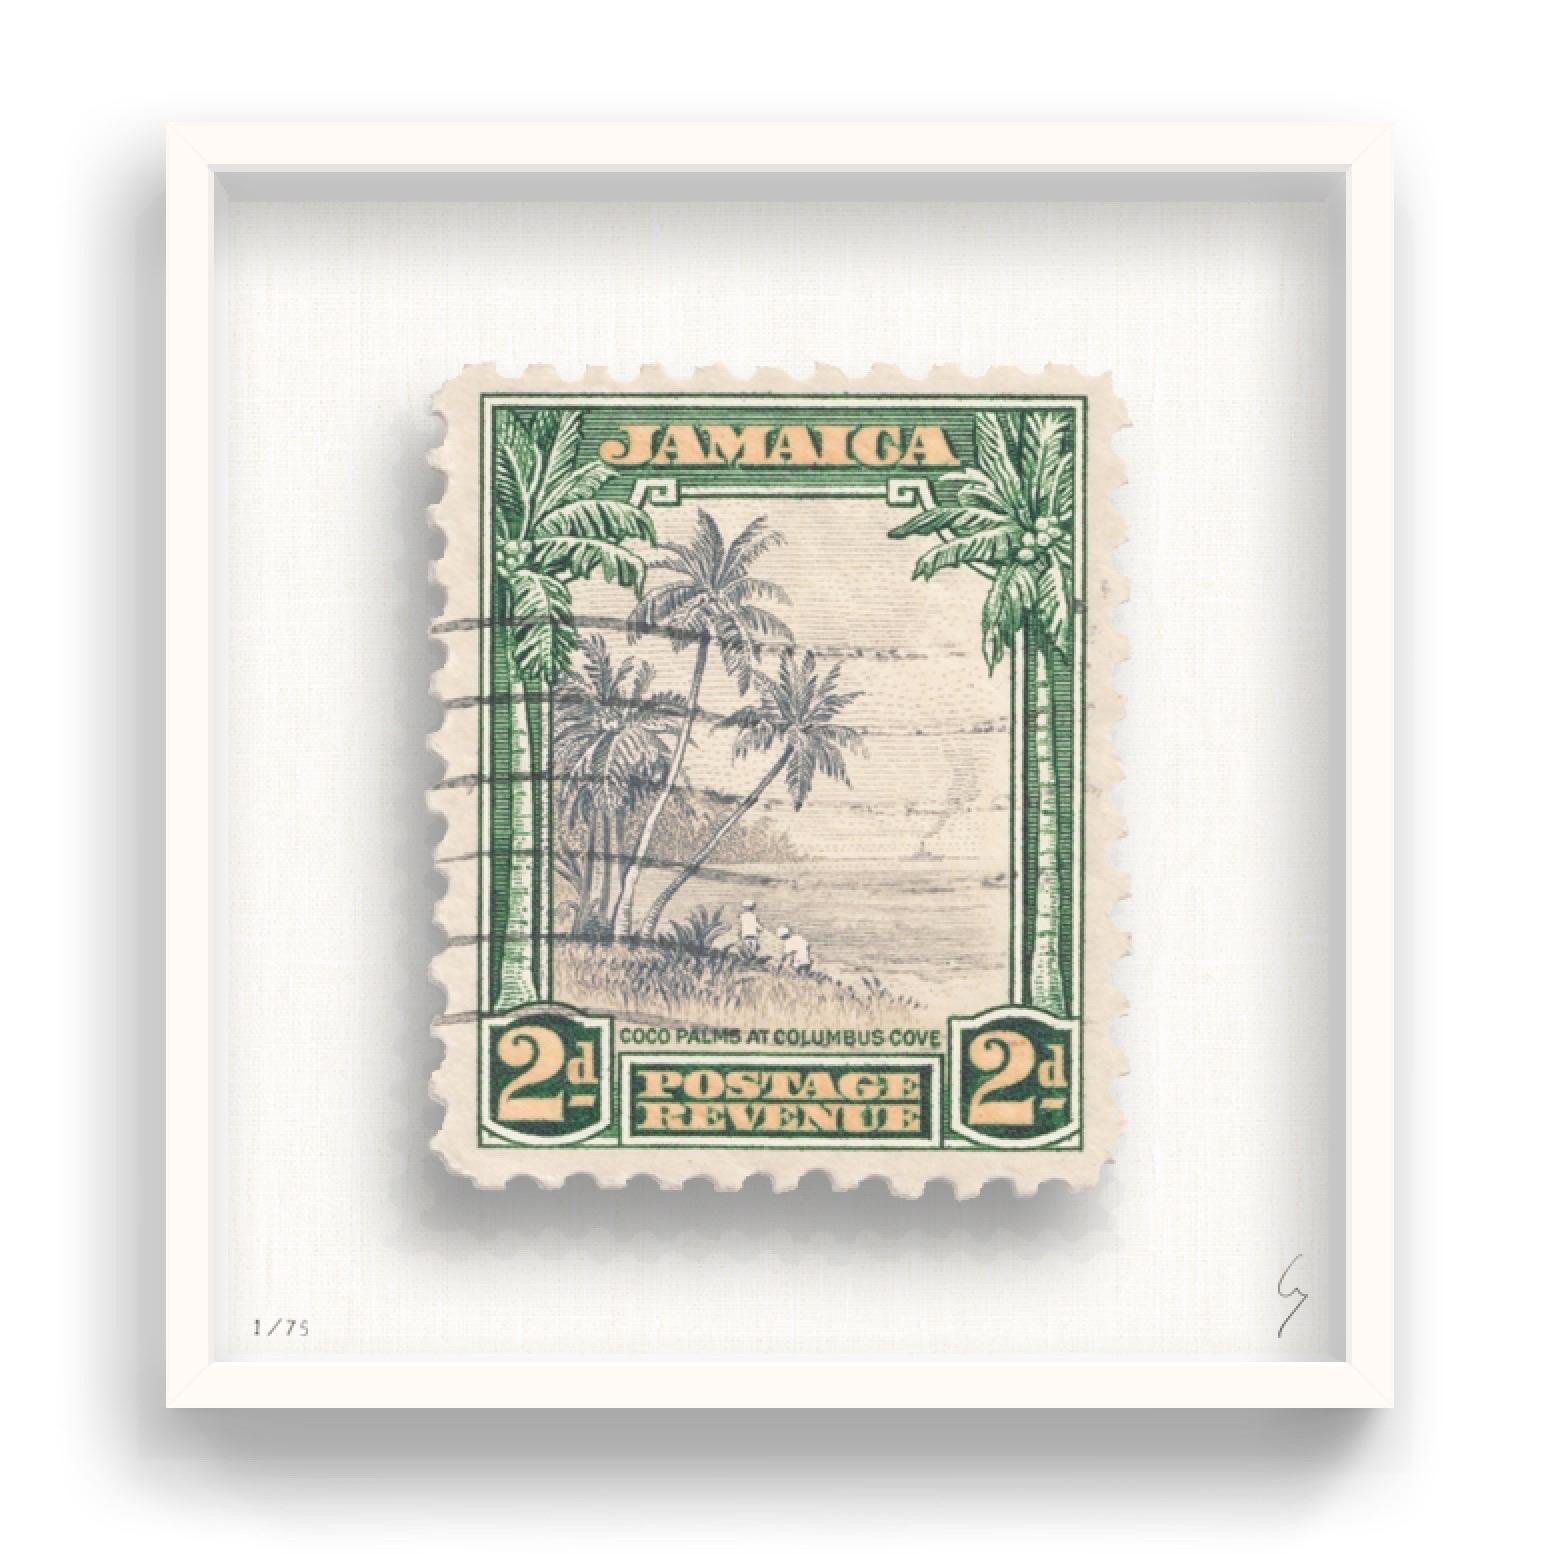 Guy Gee, Jamaica (medium)

Hand-engraved print on 350gsm on G.F Smith card
53 x 56cm (20 4/5 x 22 2/5 in)
Frame included 
Edition of 75 

Each artwork by Guy had been digitally reimagined from an original postage stamp. Cut out and finished by hand,